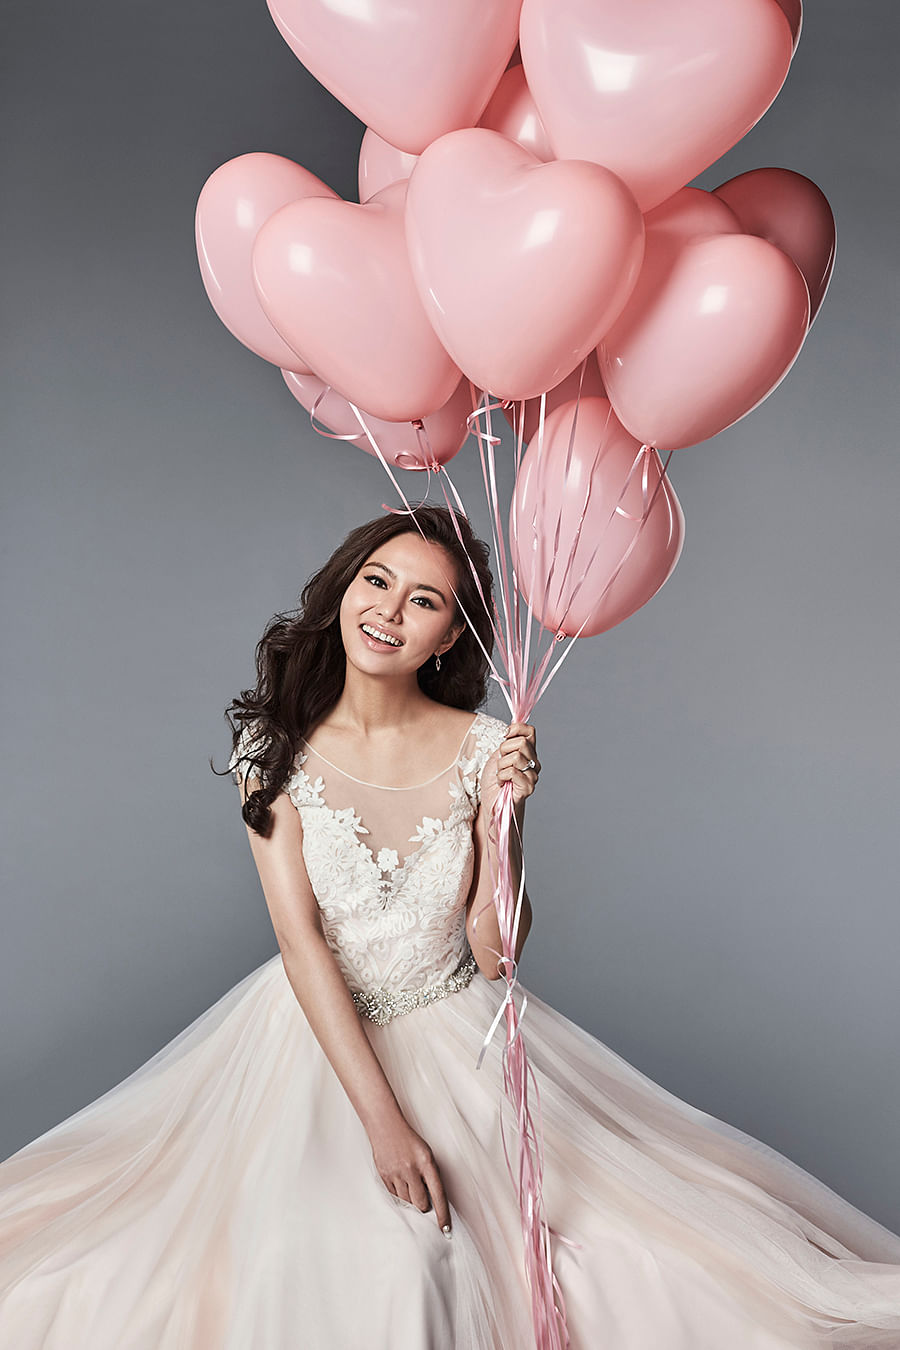 Full Interview: Cheryl Wee reveals more about her wedding, fiance and more!  